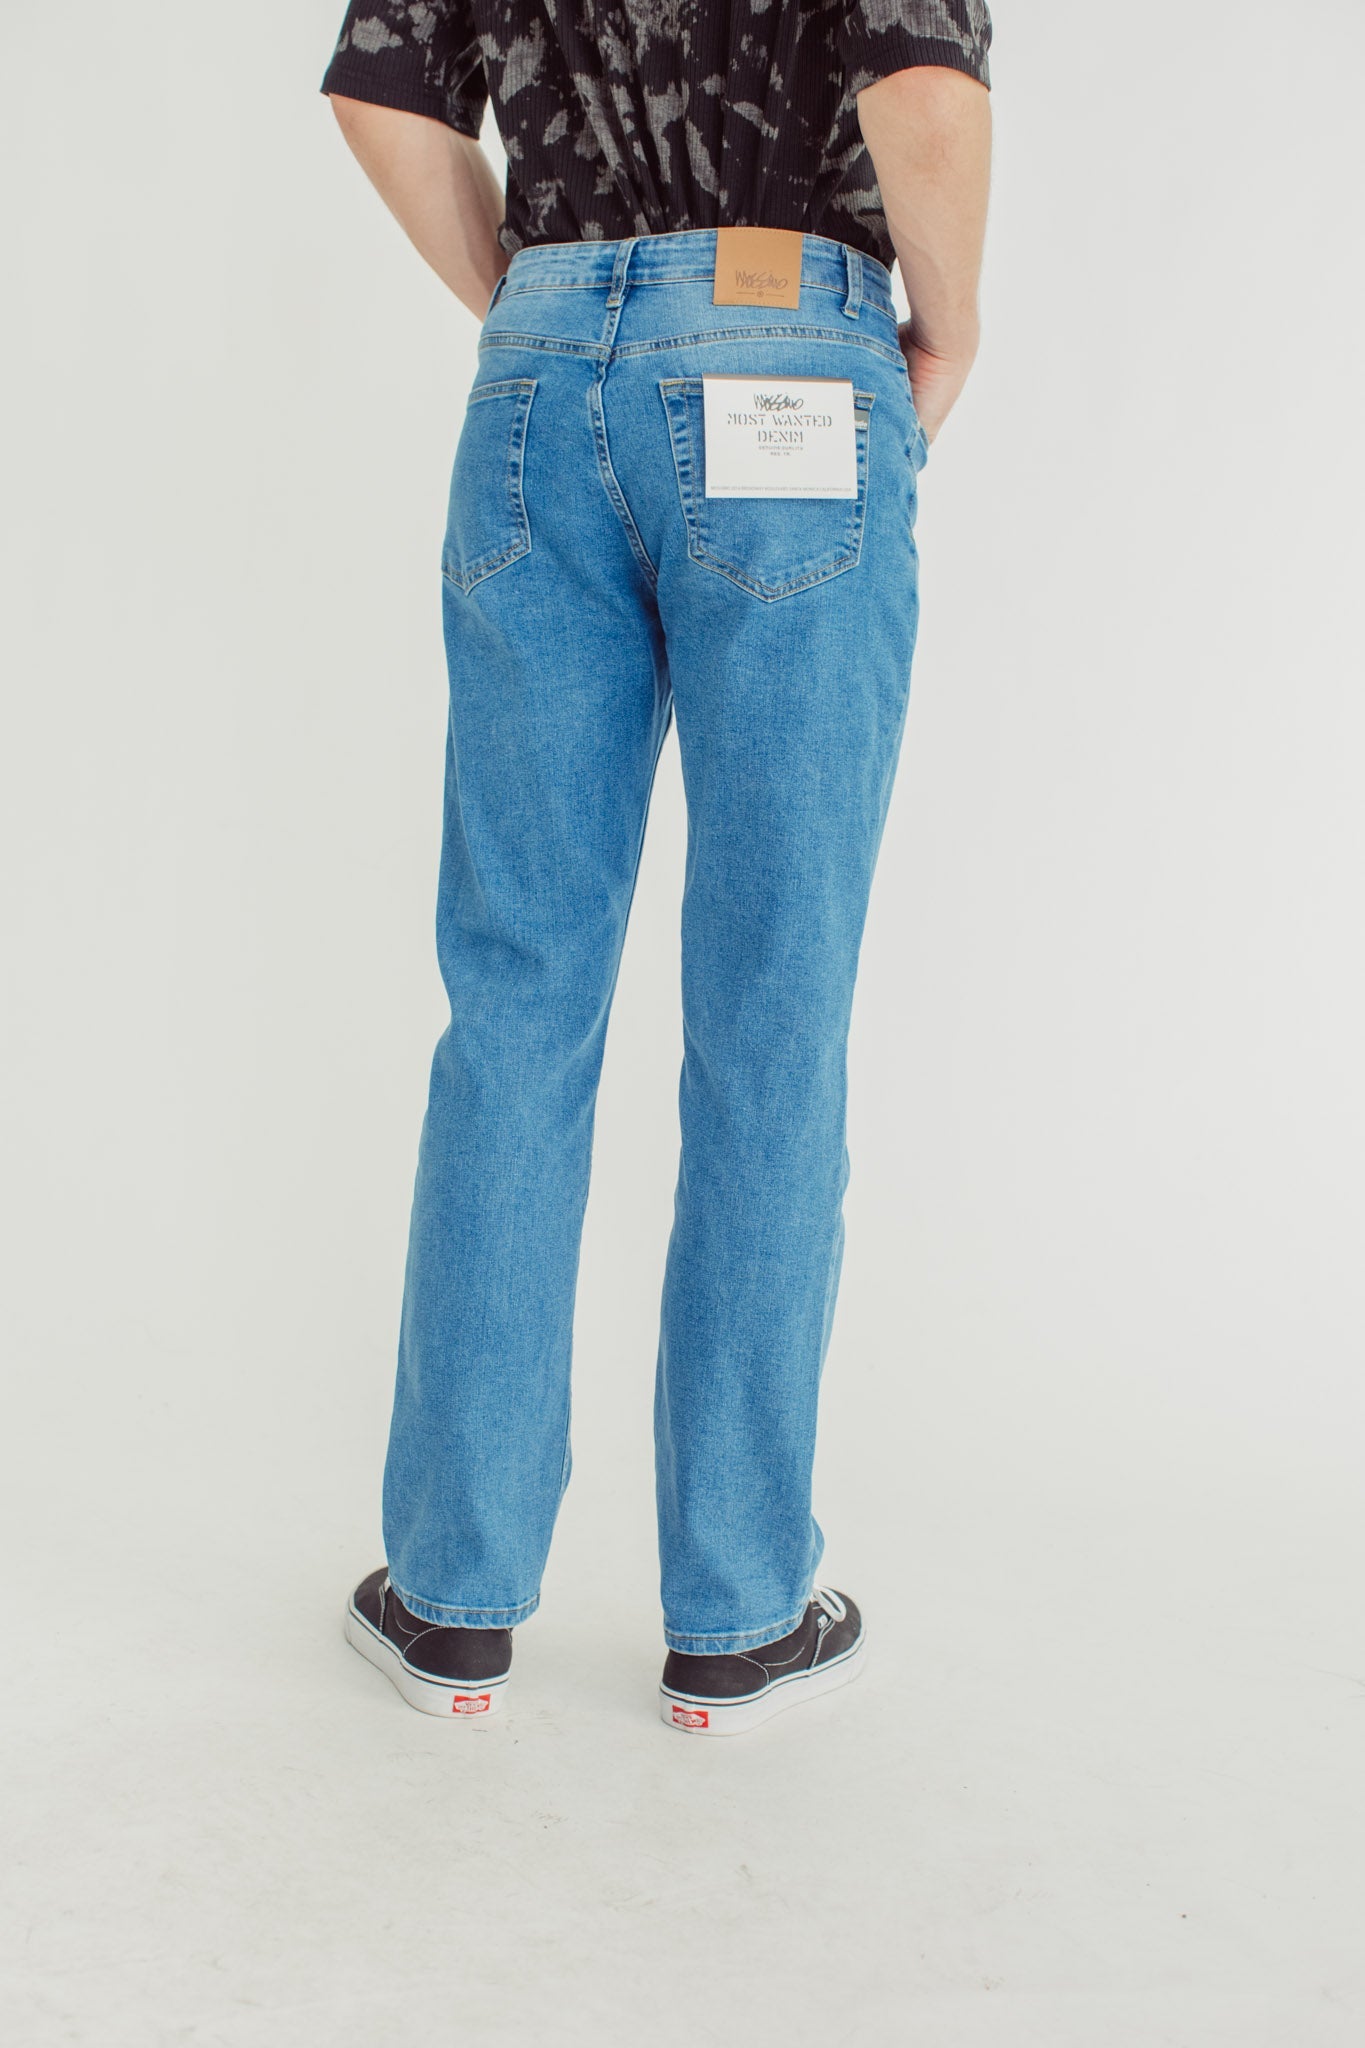 Medium Blue Straight Mid Rise Most Wanted Denim Basic Five Pocket Jeans - Mossimo PH